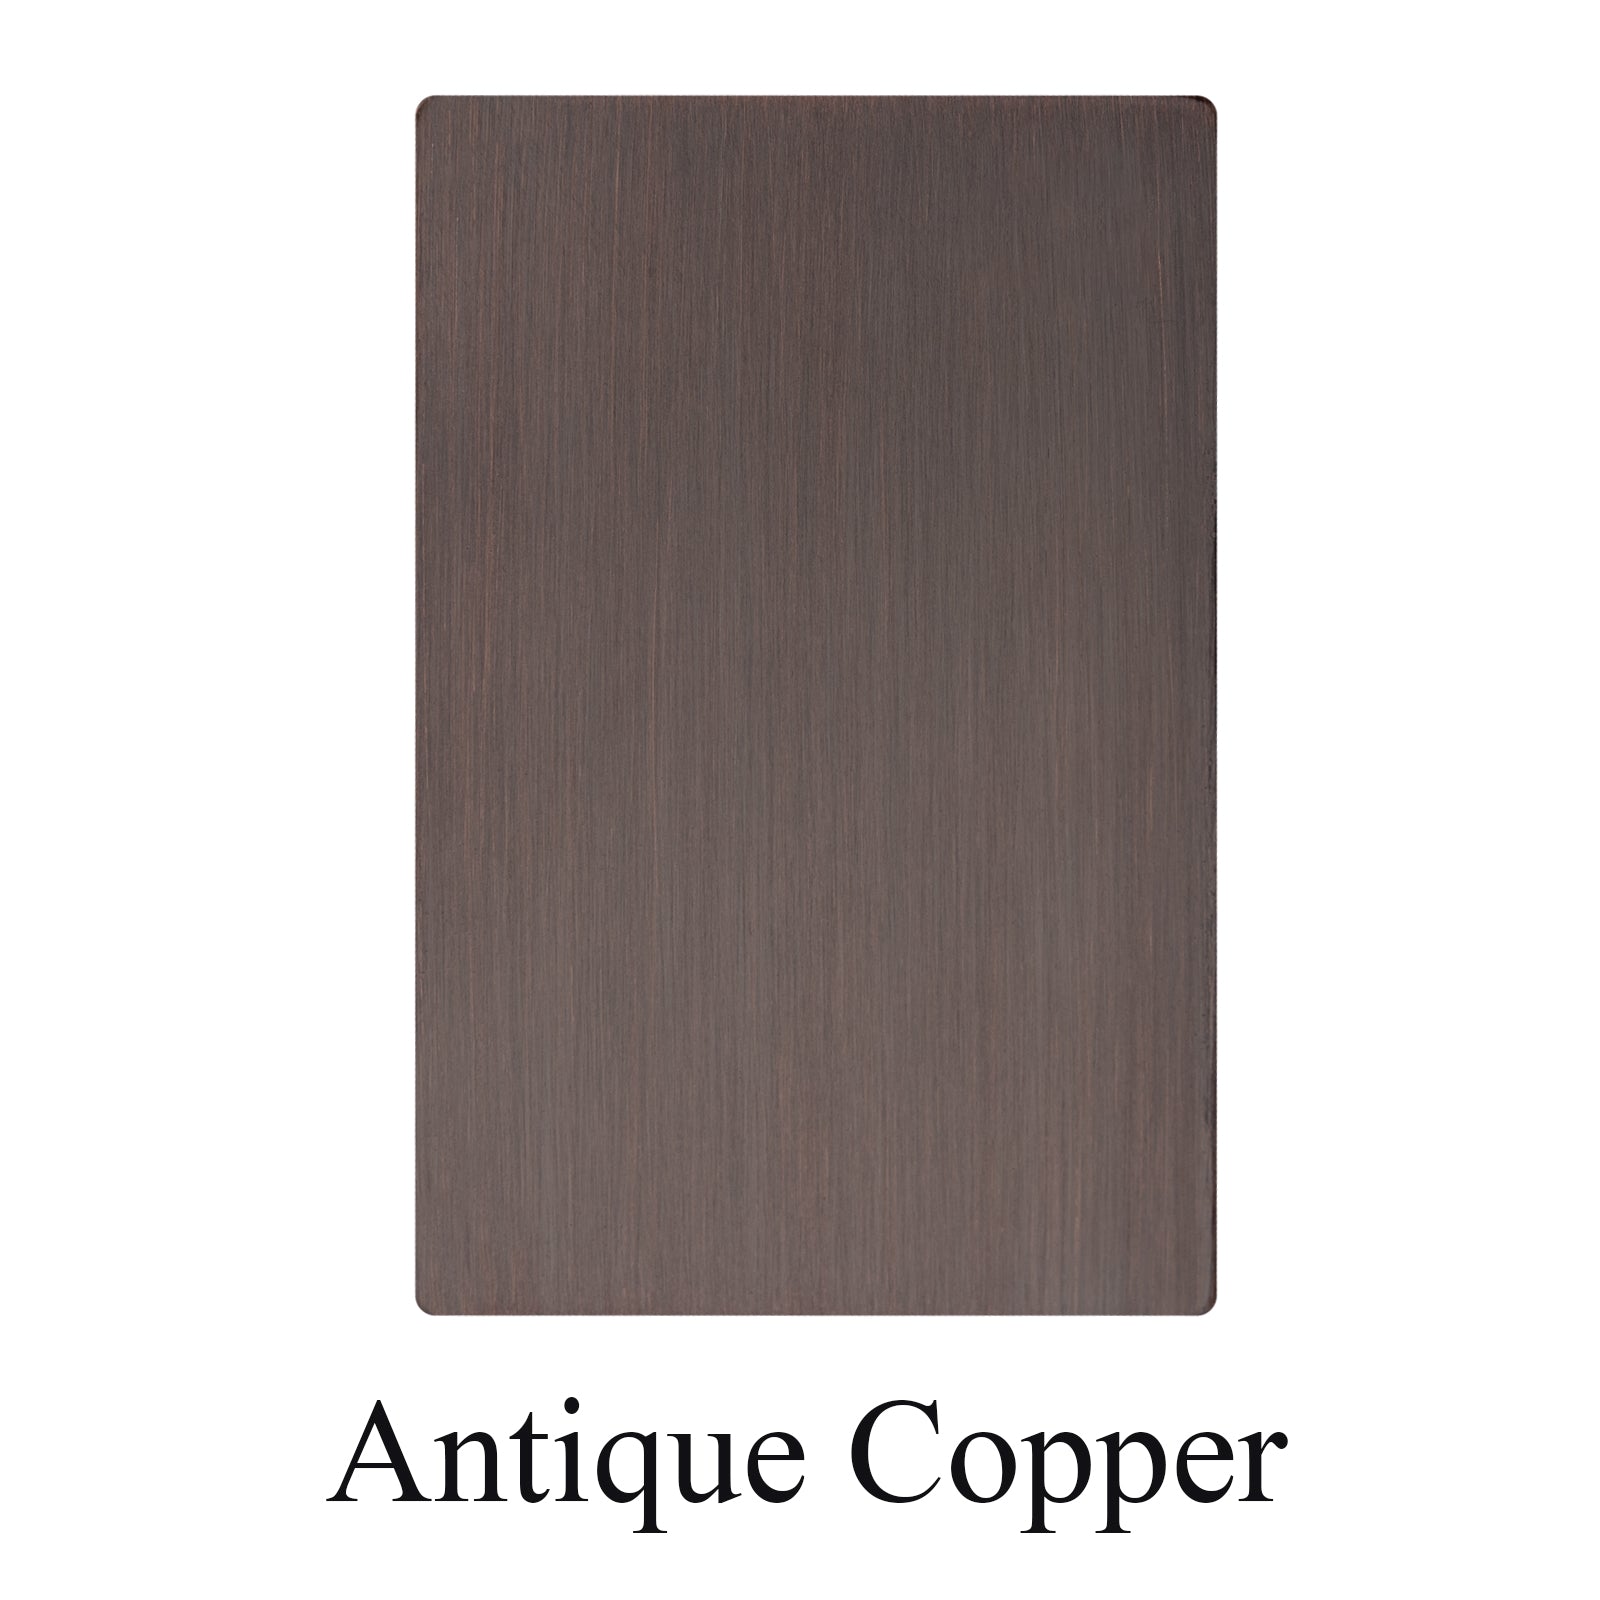 Akicon Antique Copper Stainless Steel Sample